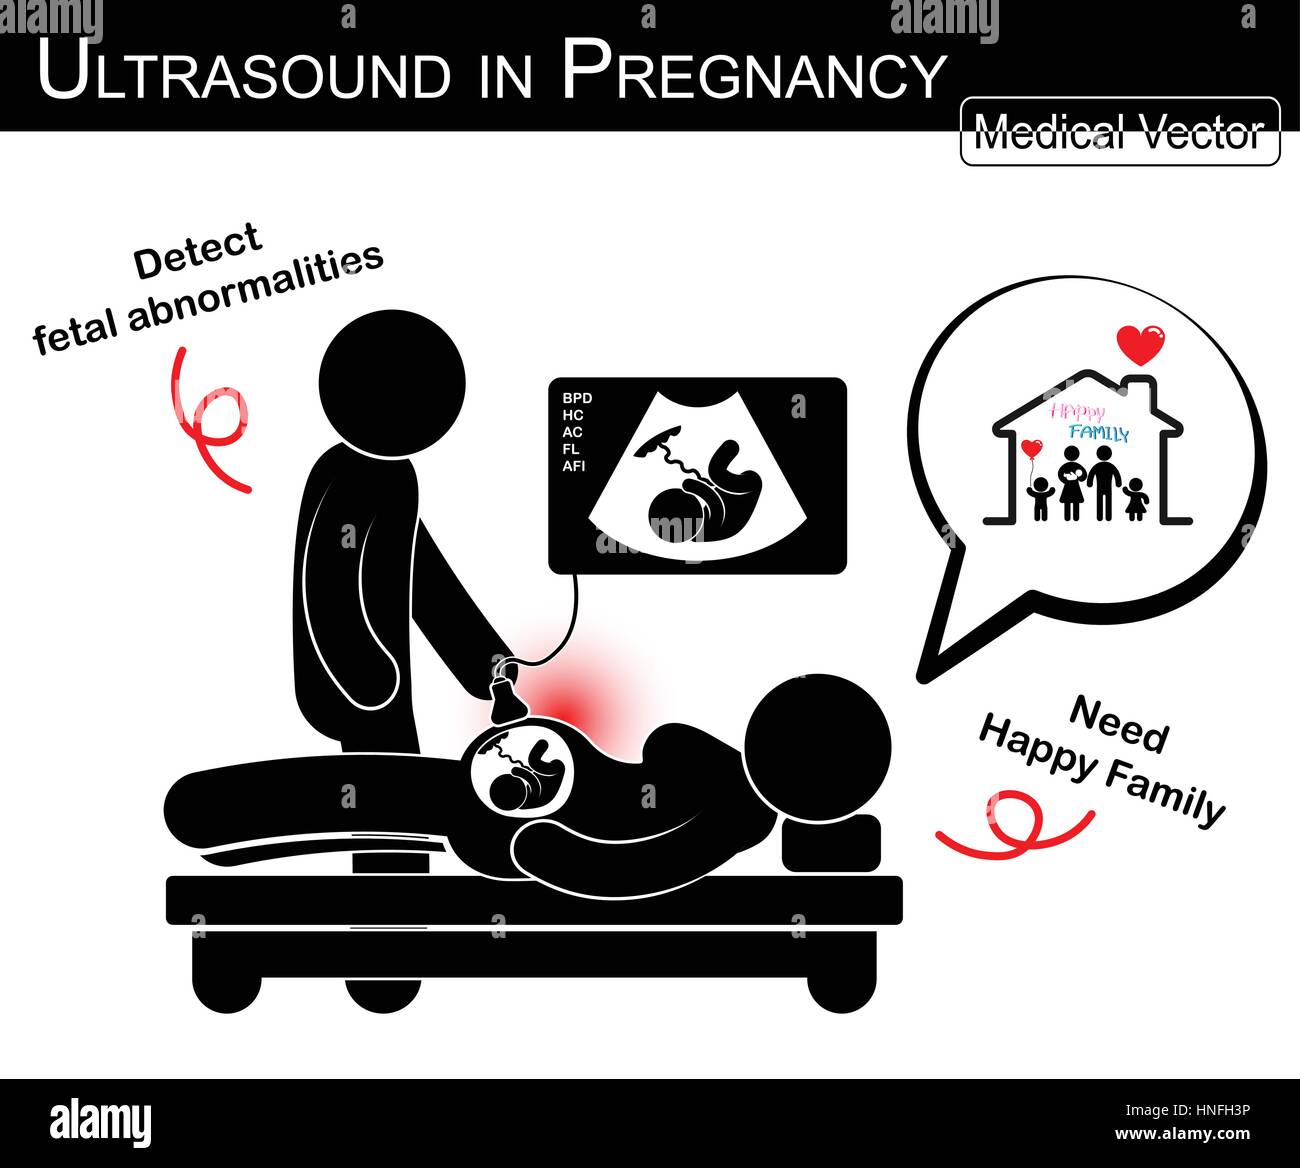 Doctor check up pregnant woman and fetal growth in uterus by ultrasonography ( woman think about happy family in future )( Medical , Science and Healt Stock Vector